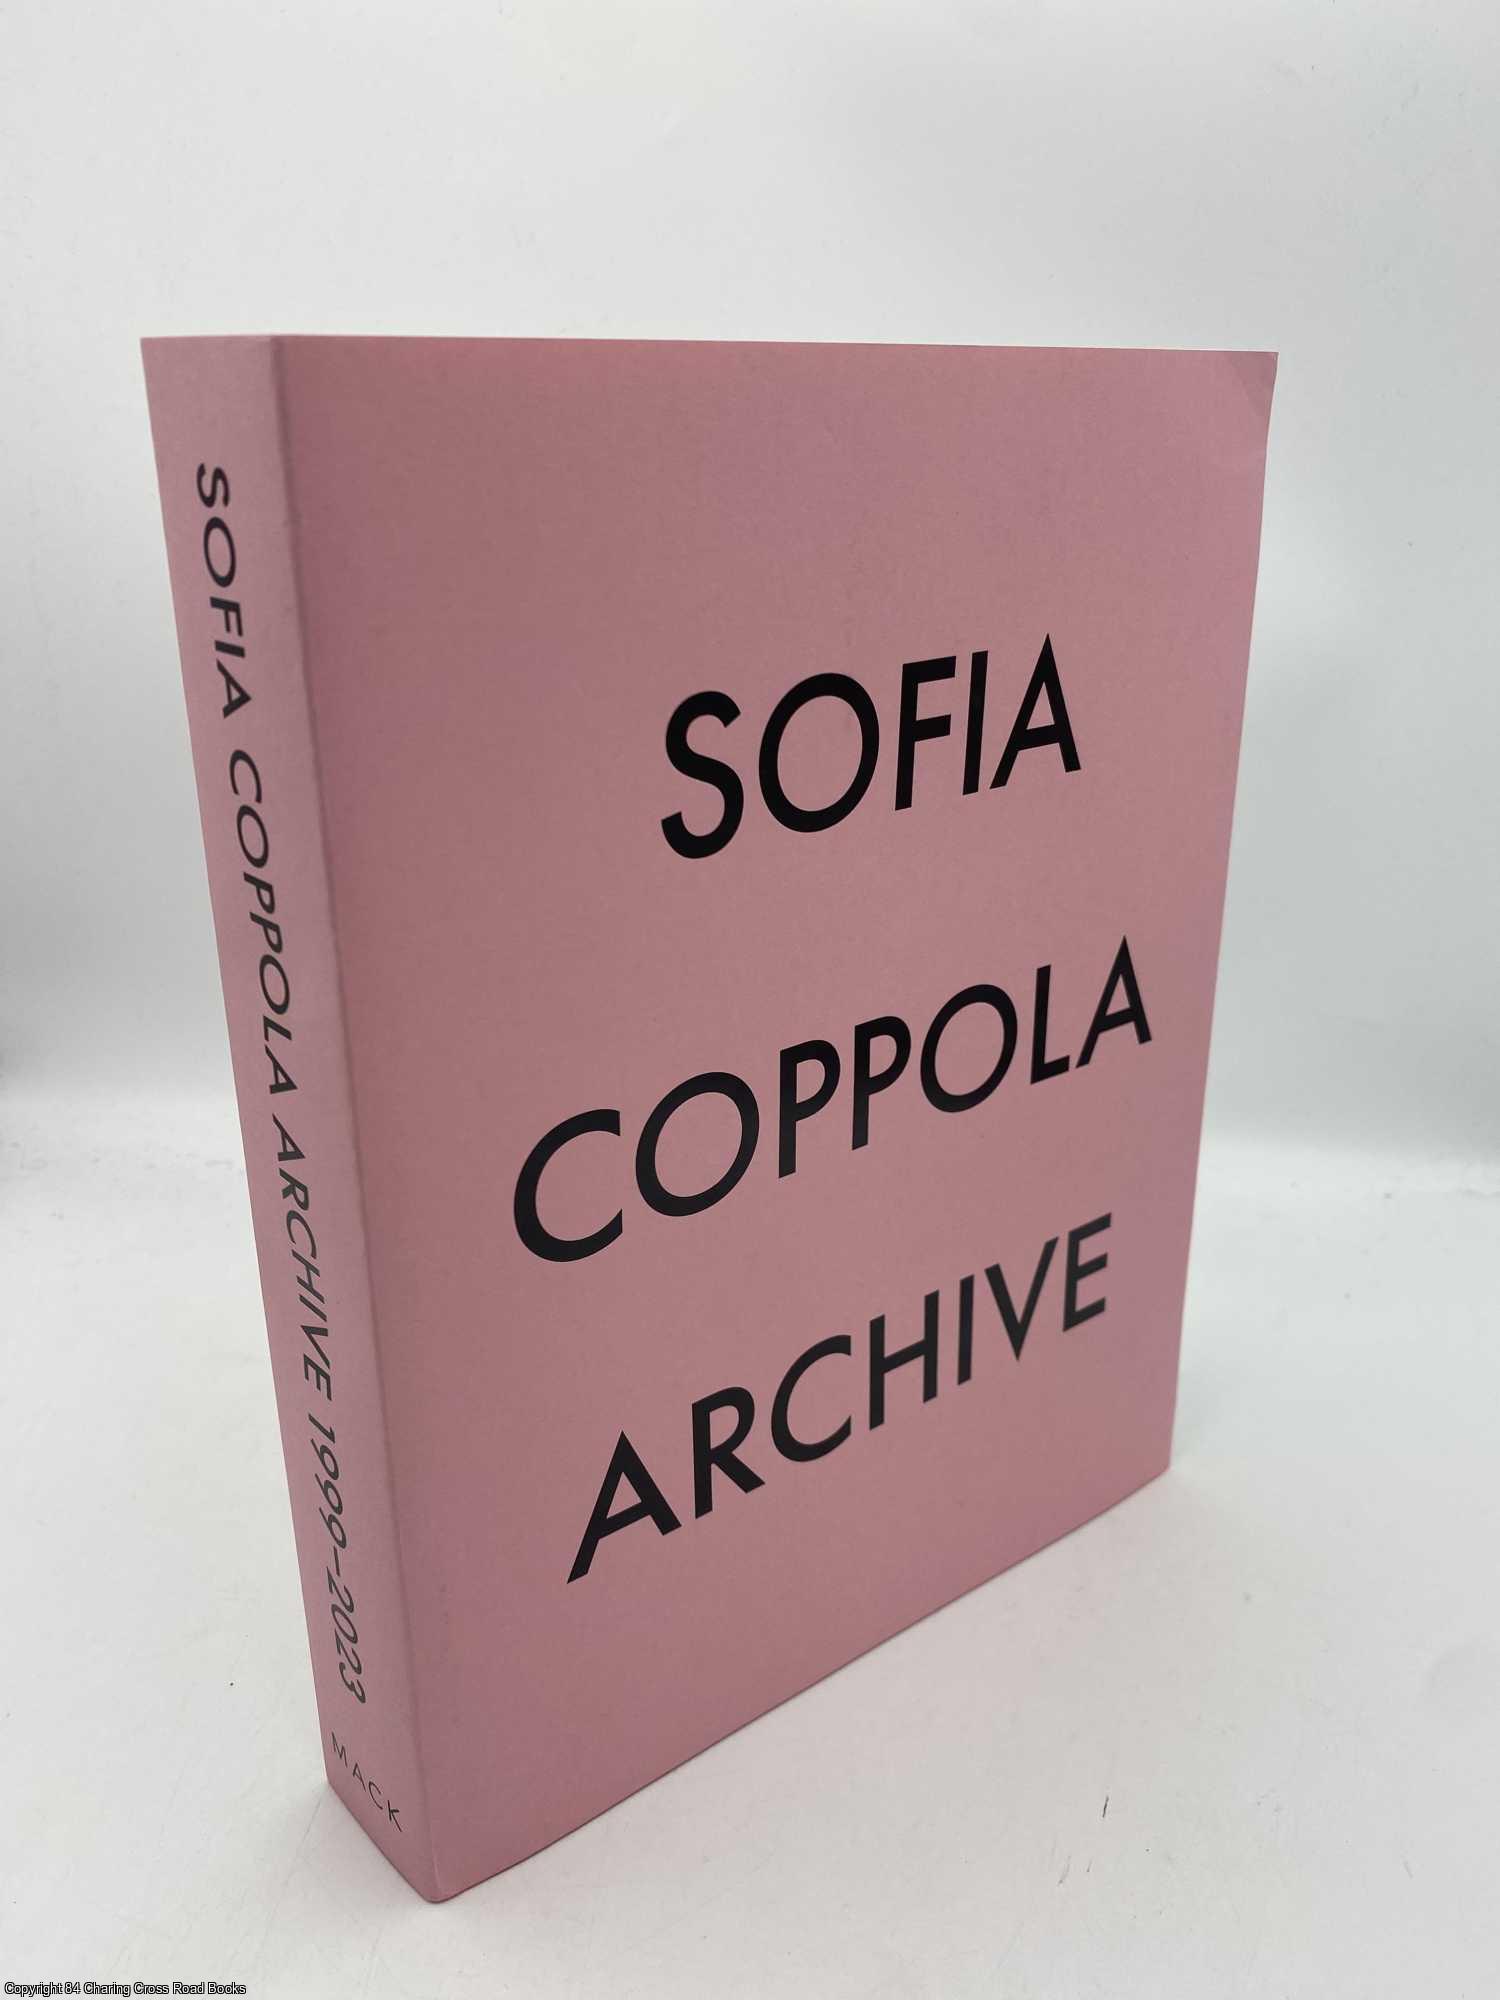 Archive Signed 1st edition by Sofia Coppola on 84 Charing Cross Rare Books